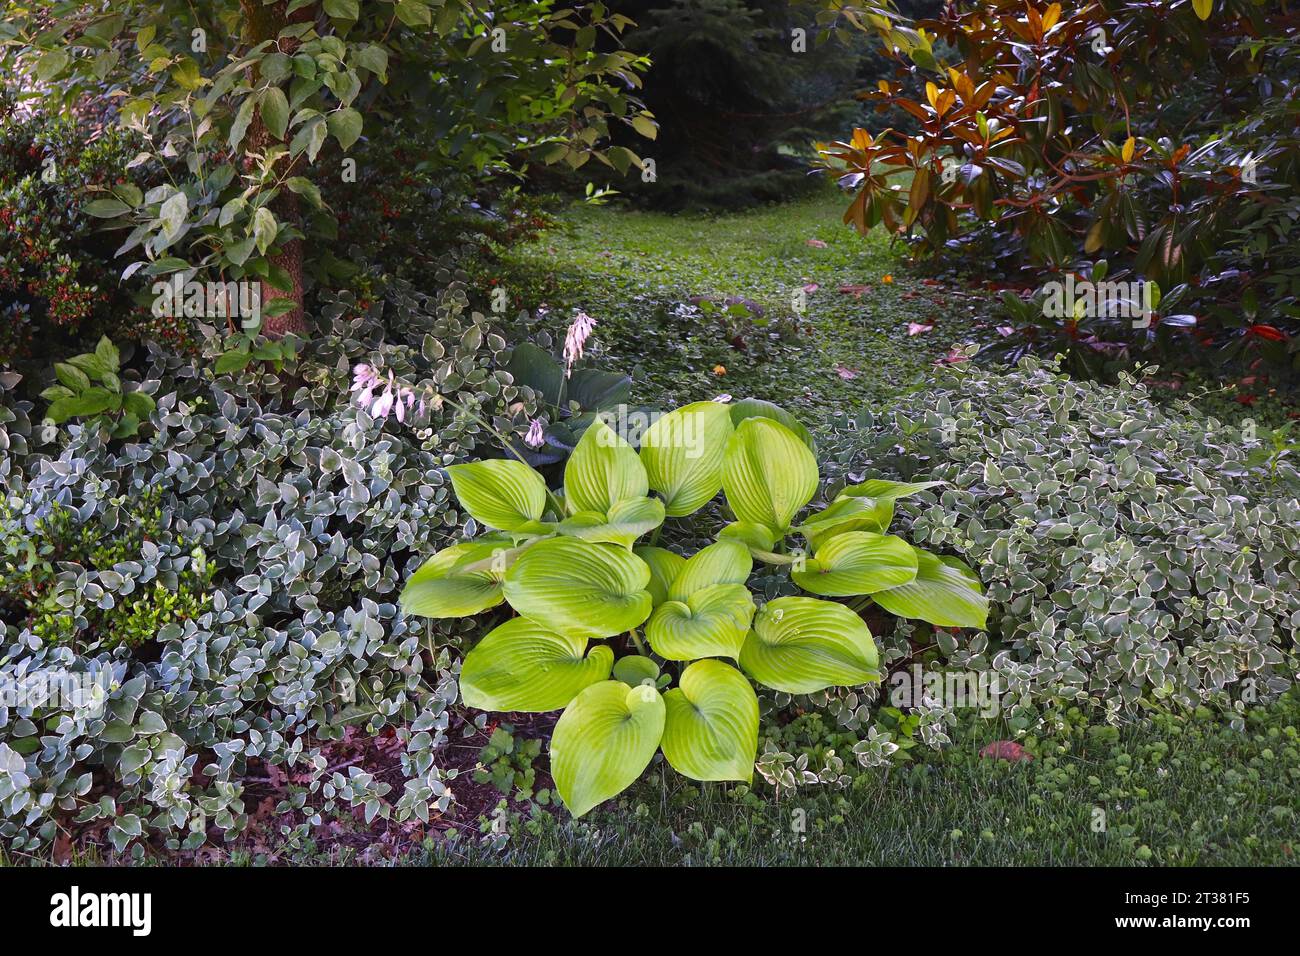 Hosta Plant and Other Greenery for Shade Garden Stock Photo